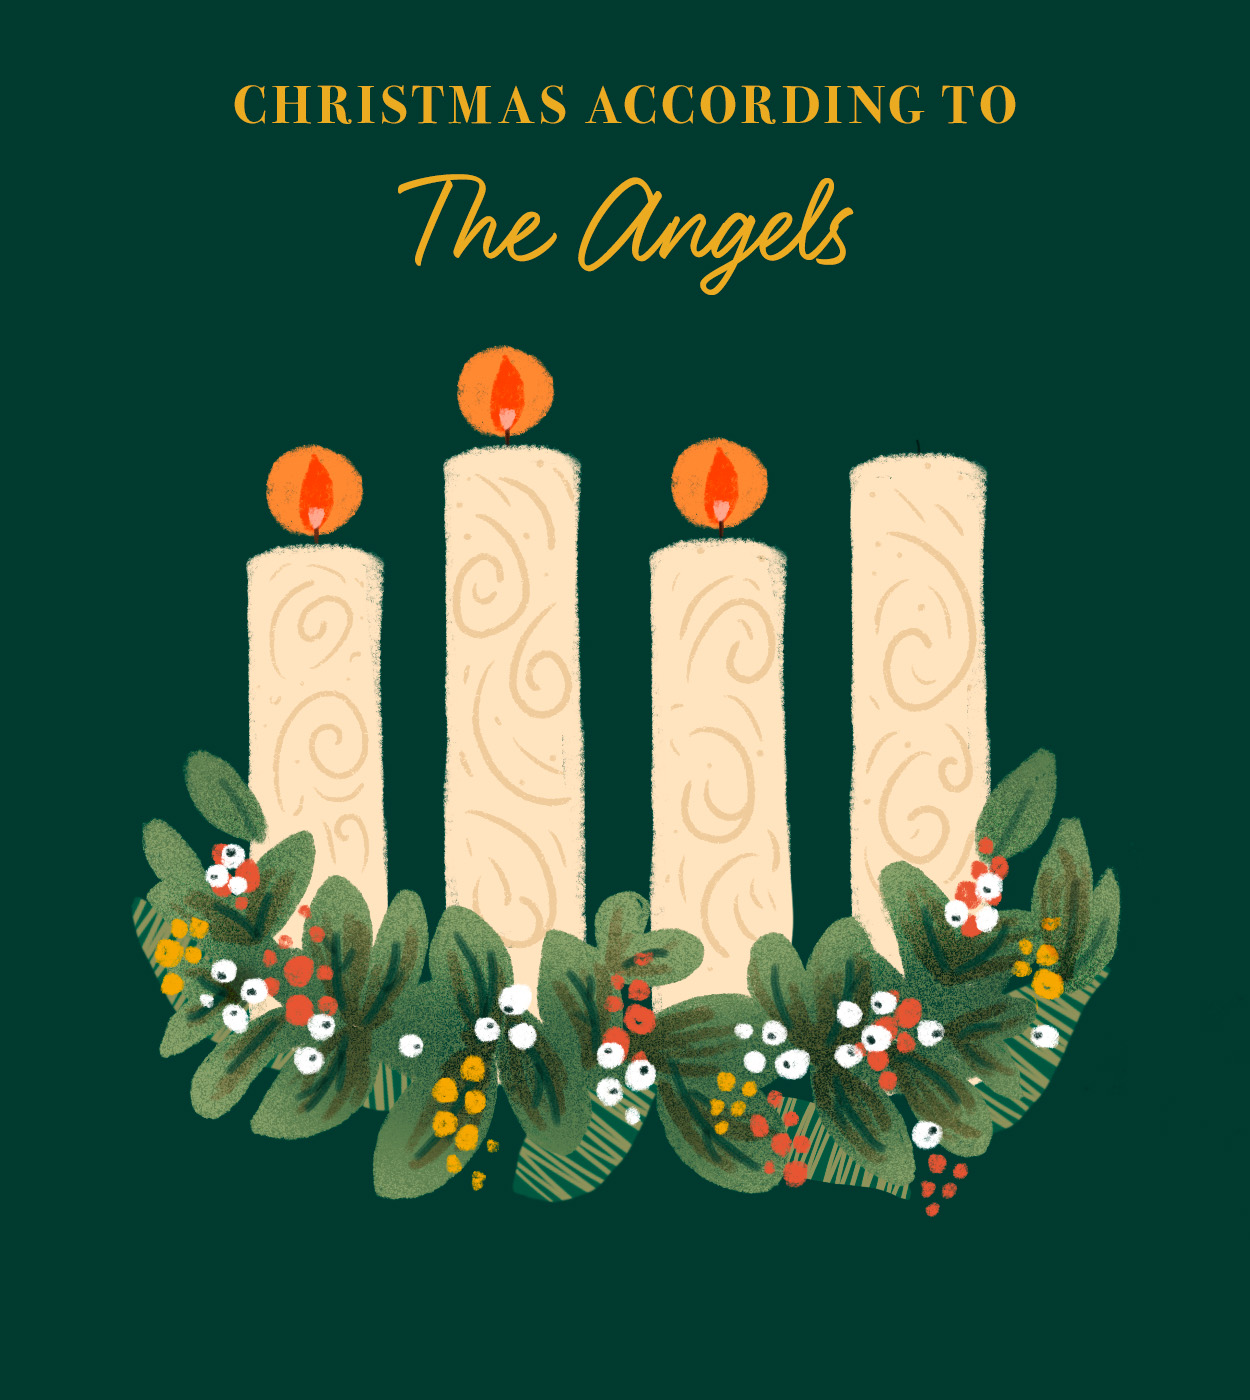 The Third Sunday of Advent – Luke 2:8-20 – Christmas According to the Angels